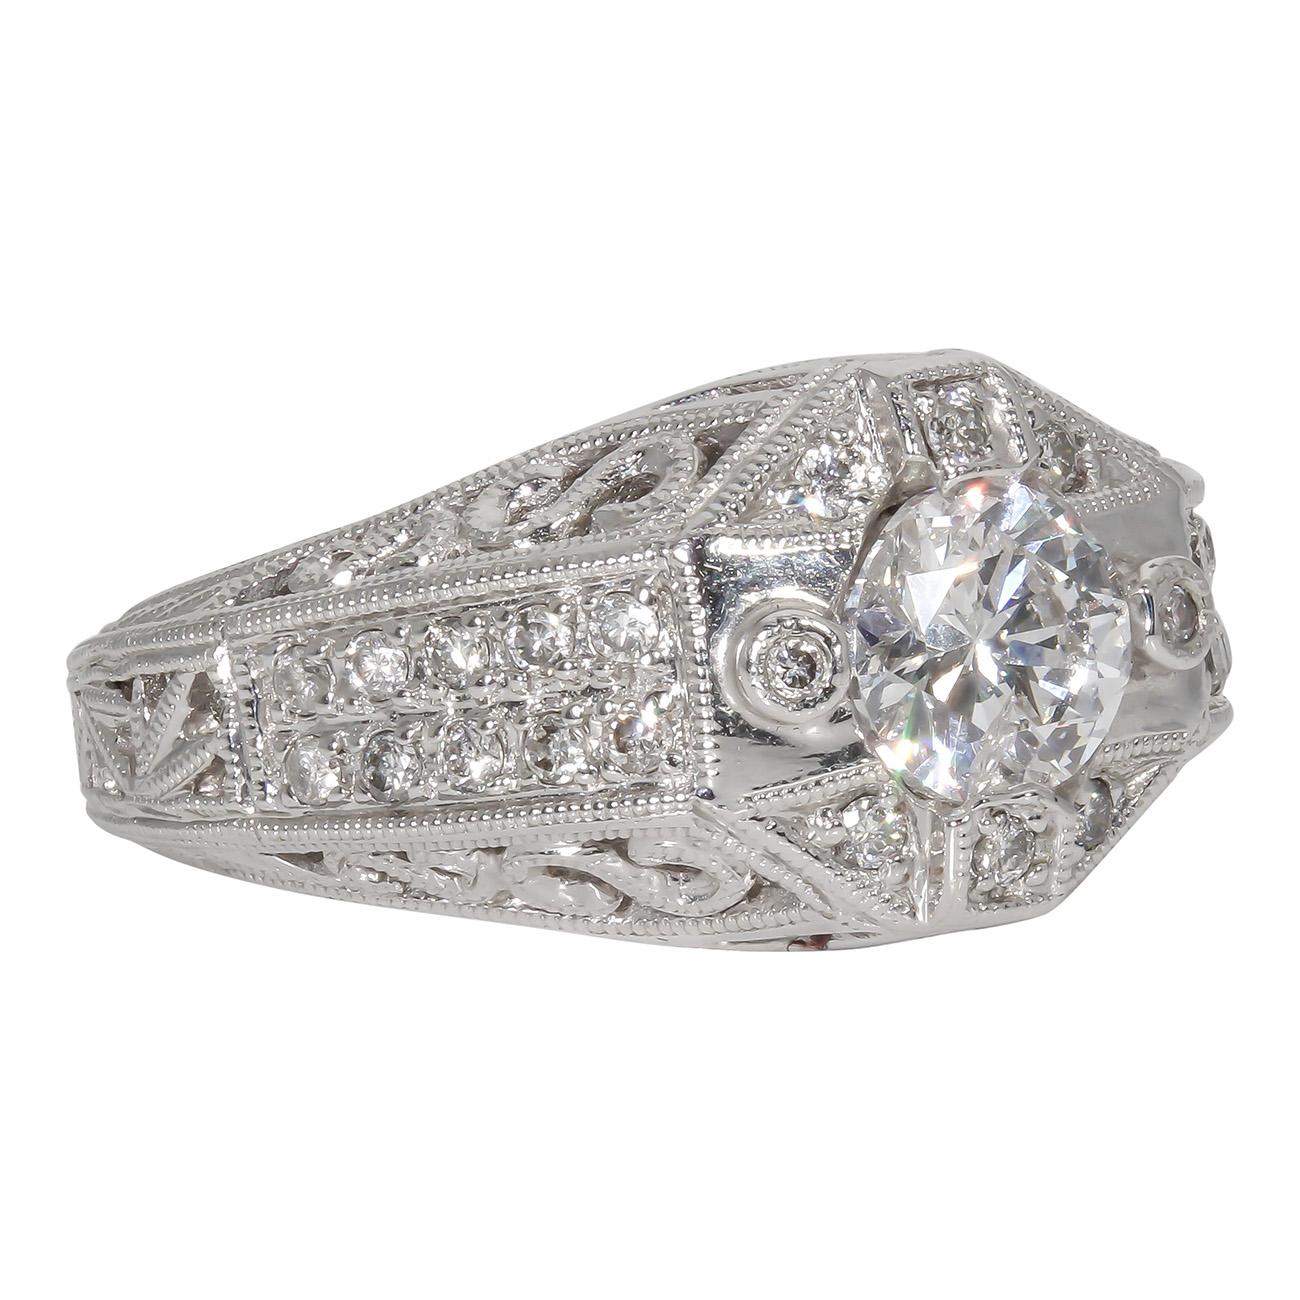 Art deco style ring in 18K WG with engraving and milgrain on the shank, pave set rounds on the sides of prong set round diamond centerstone.  D1.31ct.  (Center 1.01ct.)  Size 6.5